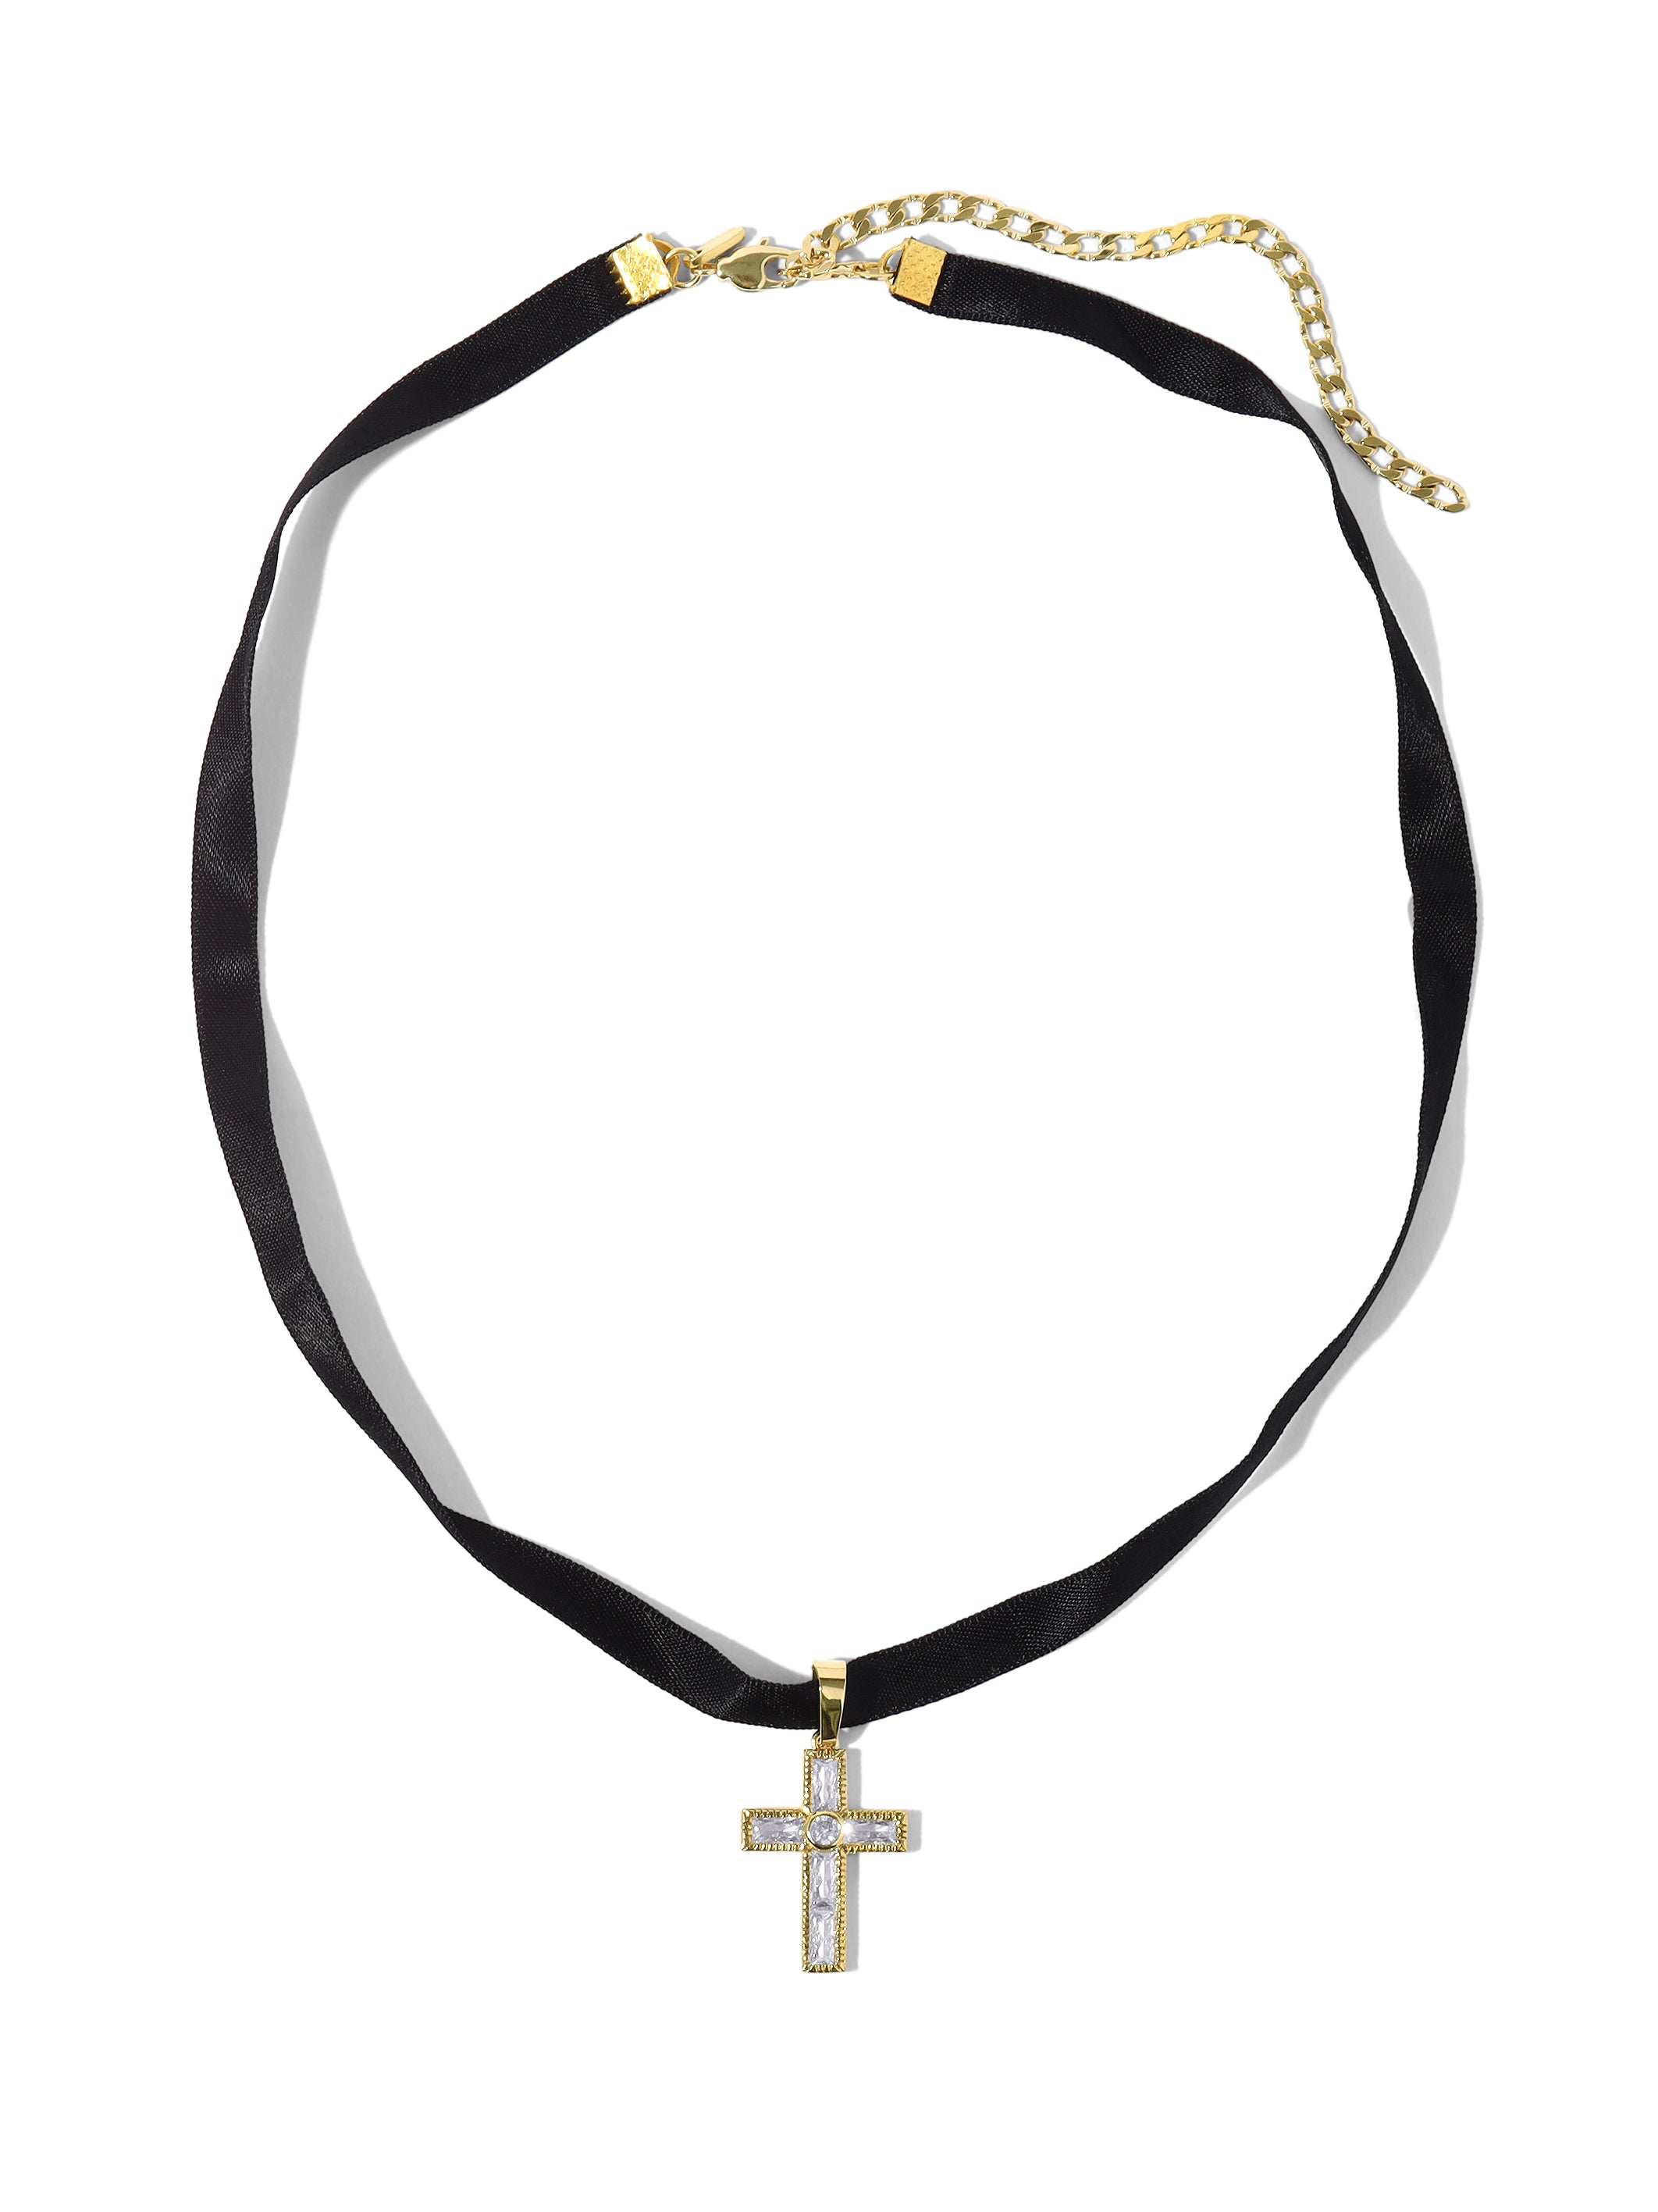 Buy Petite Side Style Cross Choker Necklace Gold Chain Jewelry Jesus  Christian Online in India - Etsy